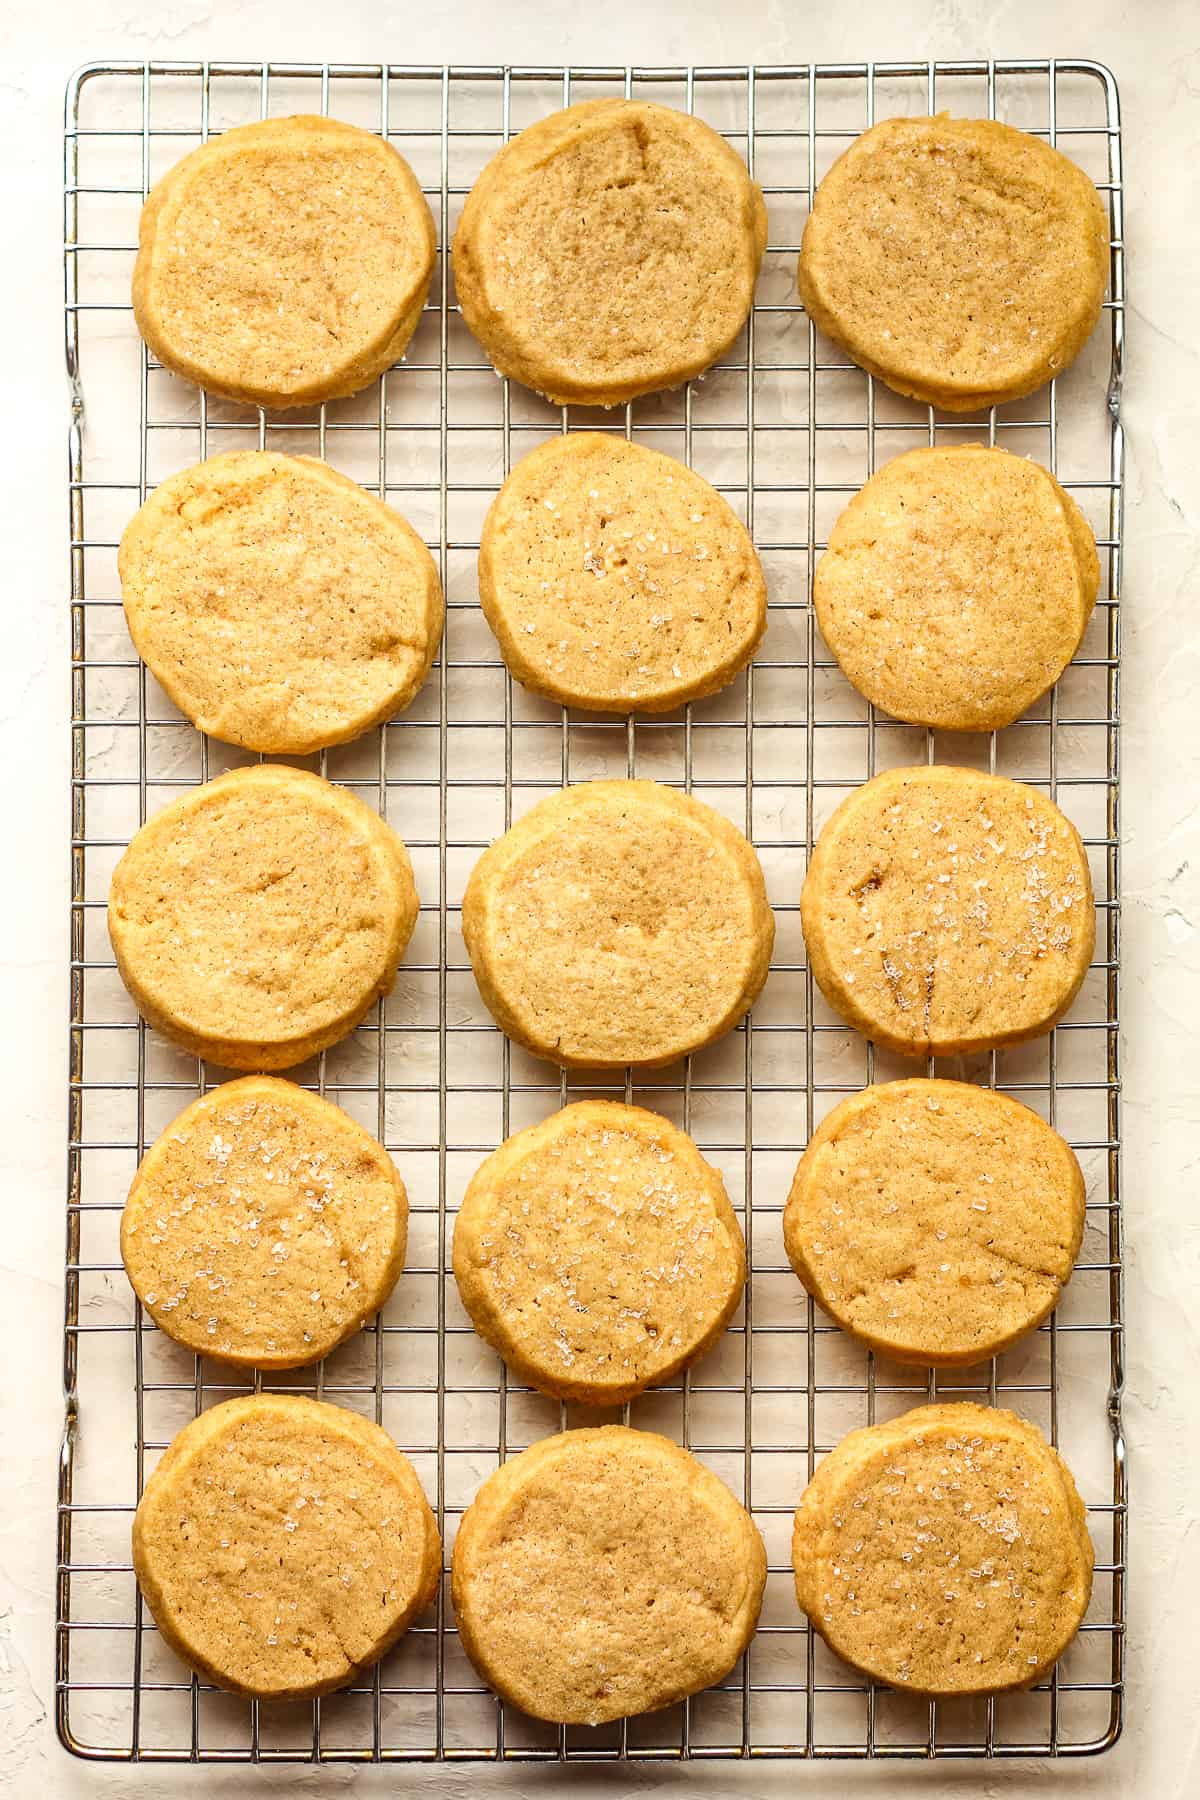 Some baked shortbread cookies on a wire cooling rack.